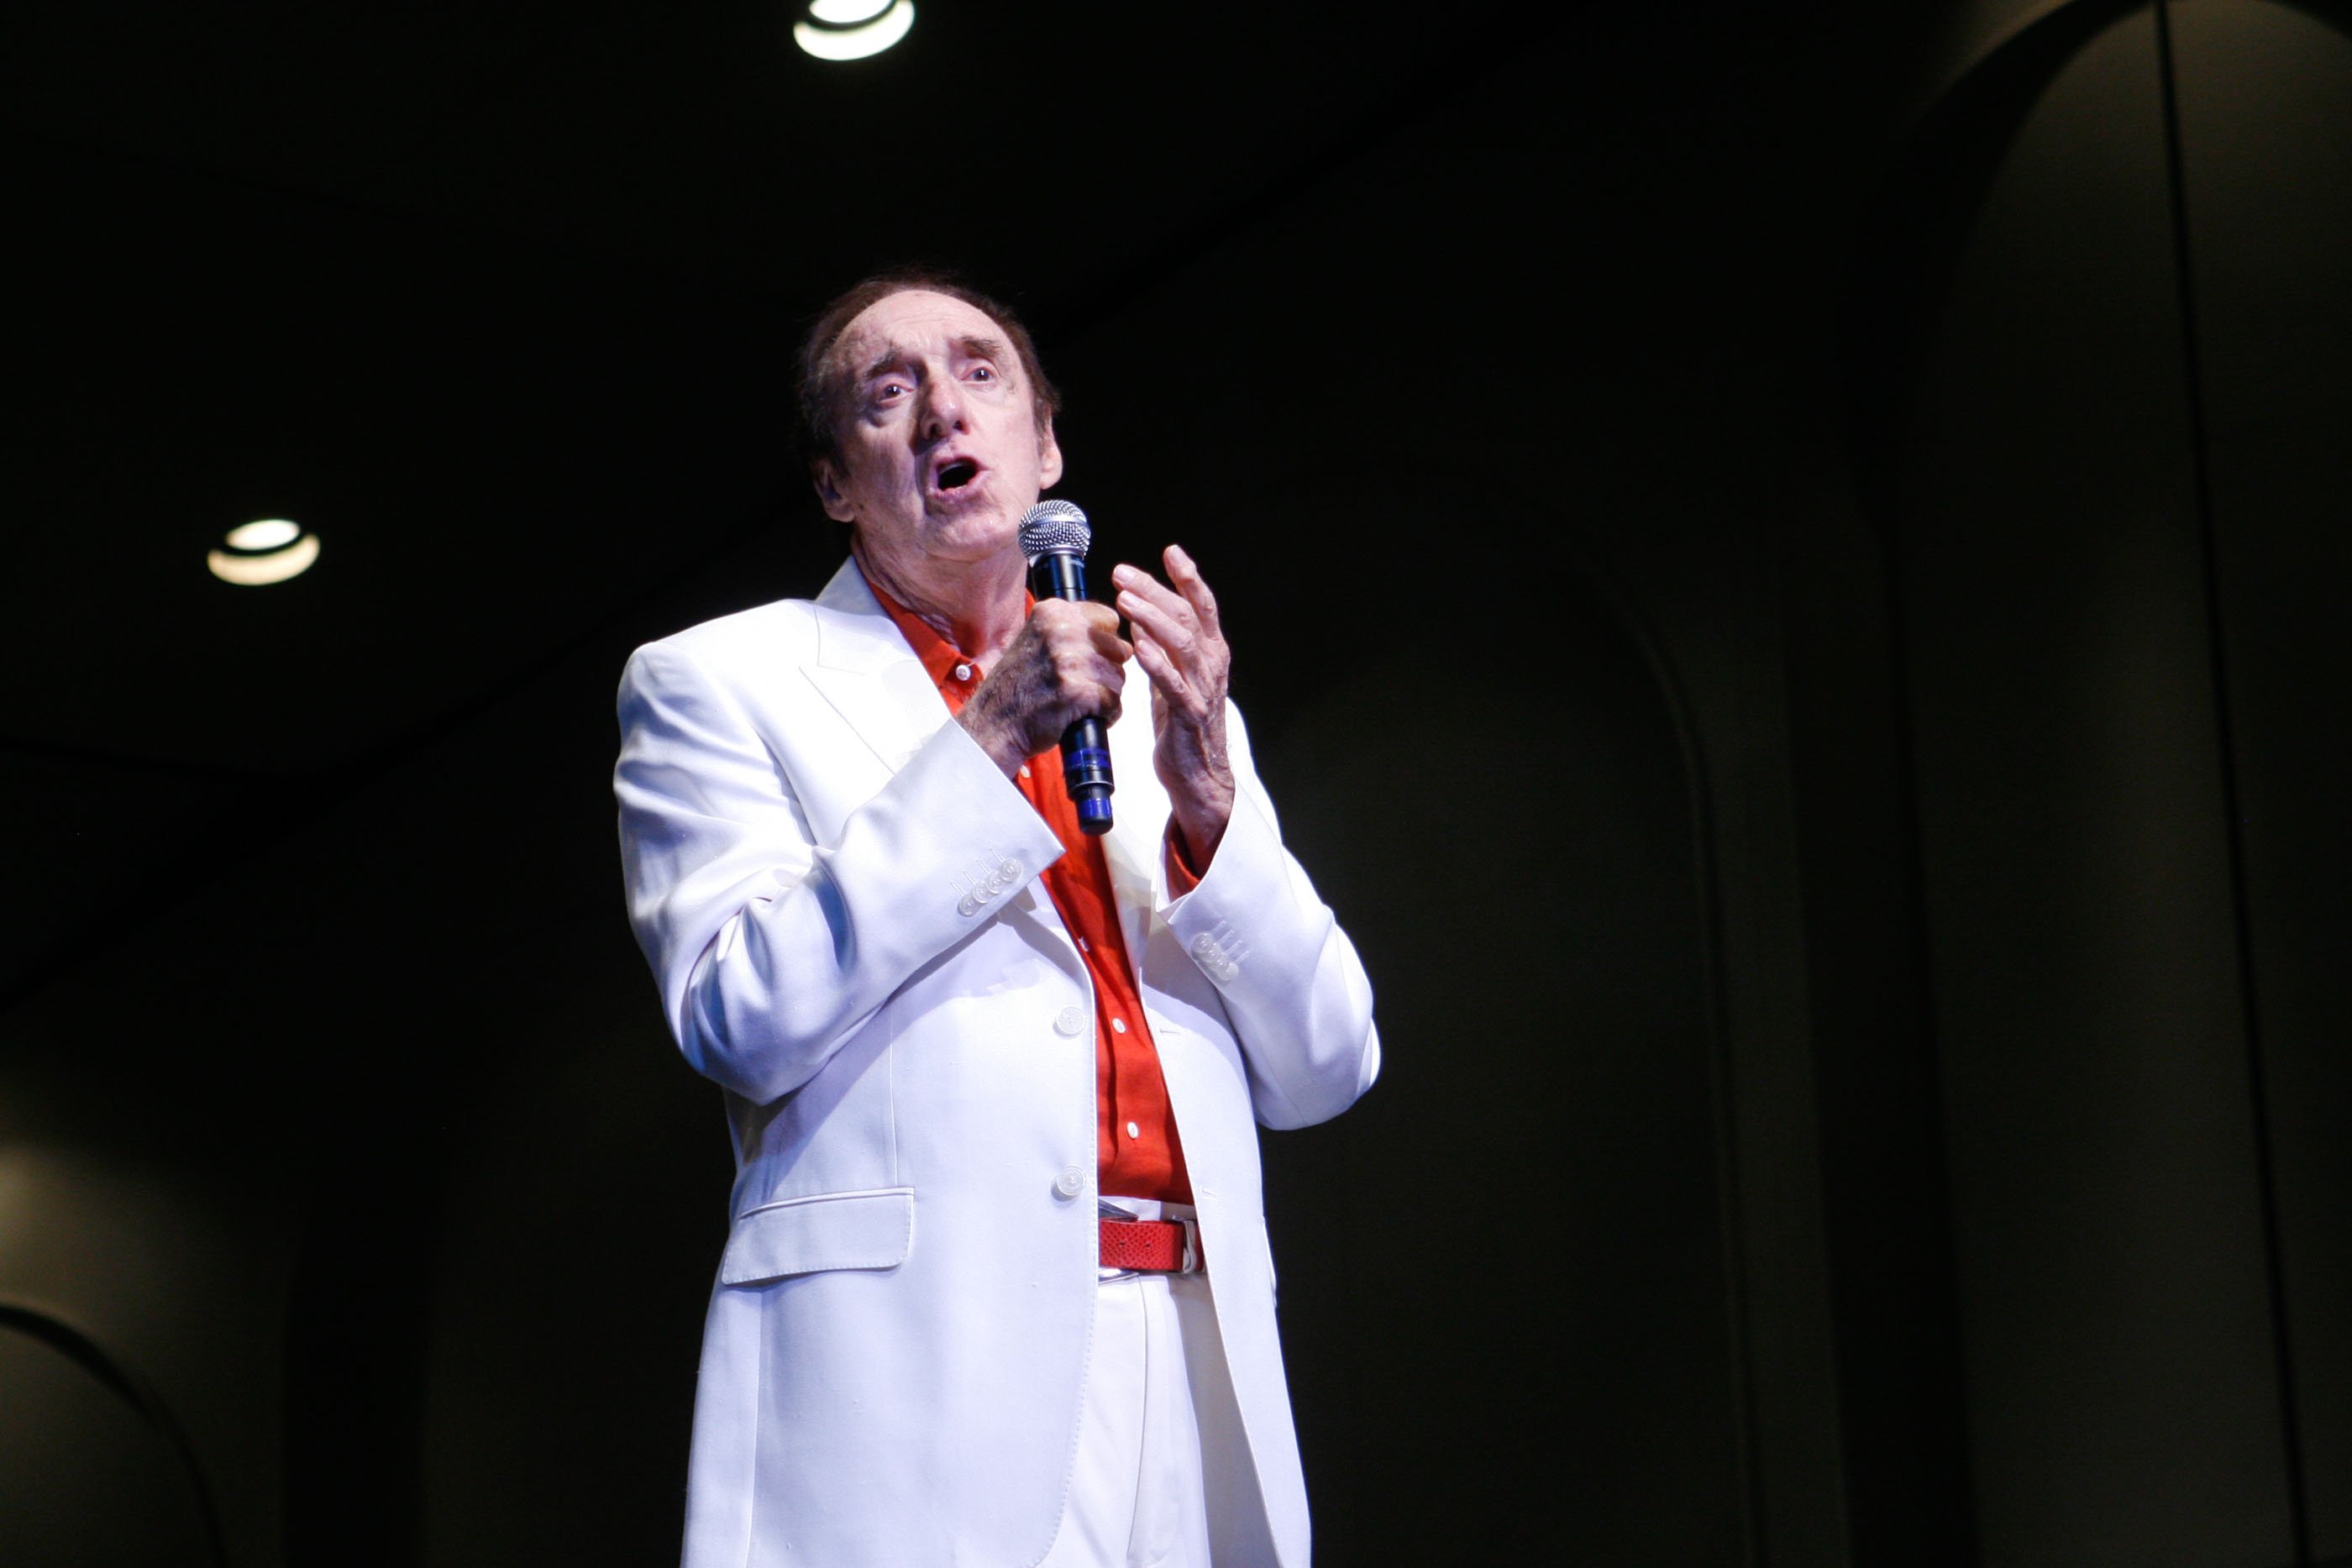 Jim Nabors sings ‘Silent Night’ during the Second Annual Na Mele o na Keiki, 'Music for the Children' at the Neal S. Blaisdell Center. | Source: Wikimedia Commons